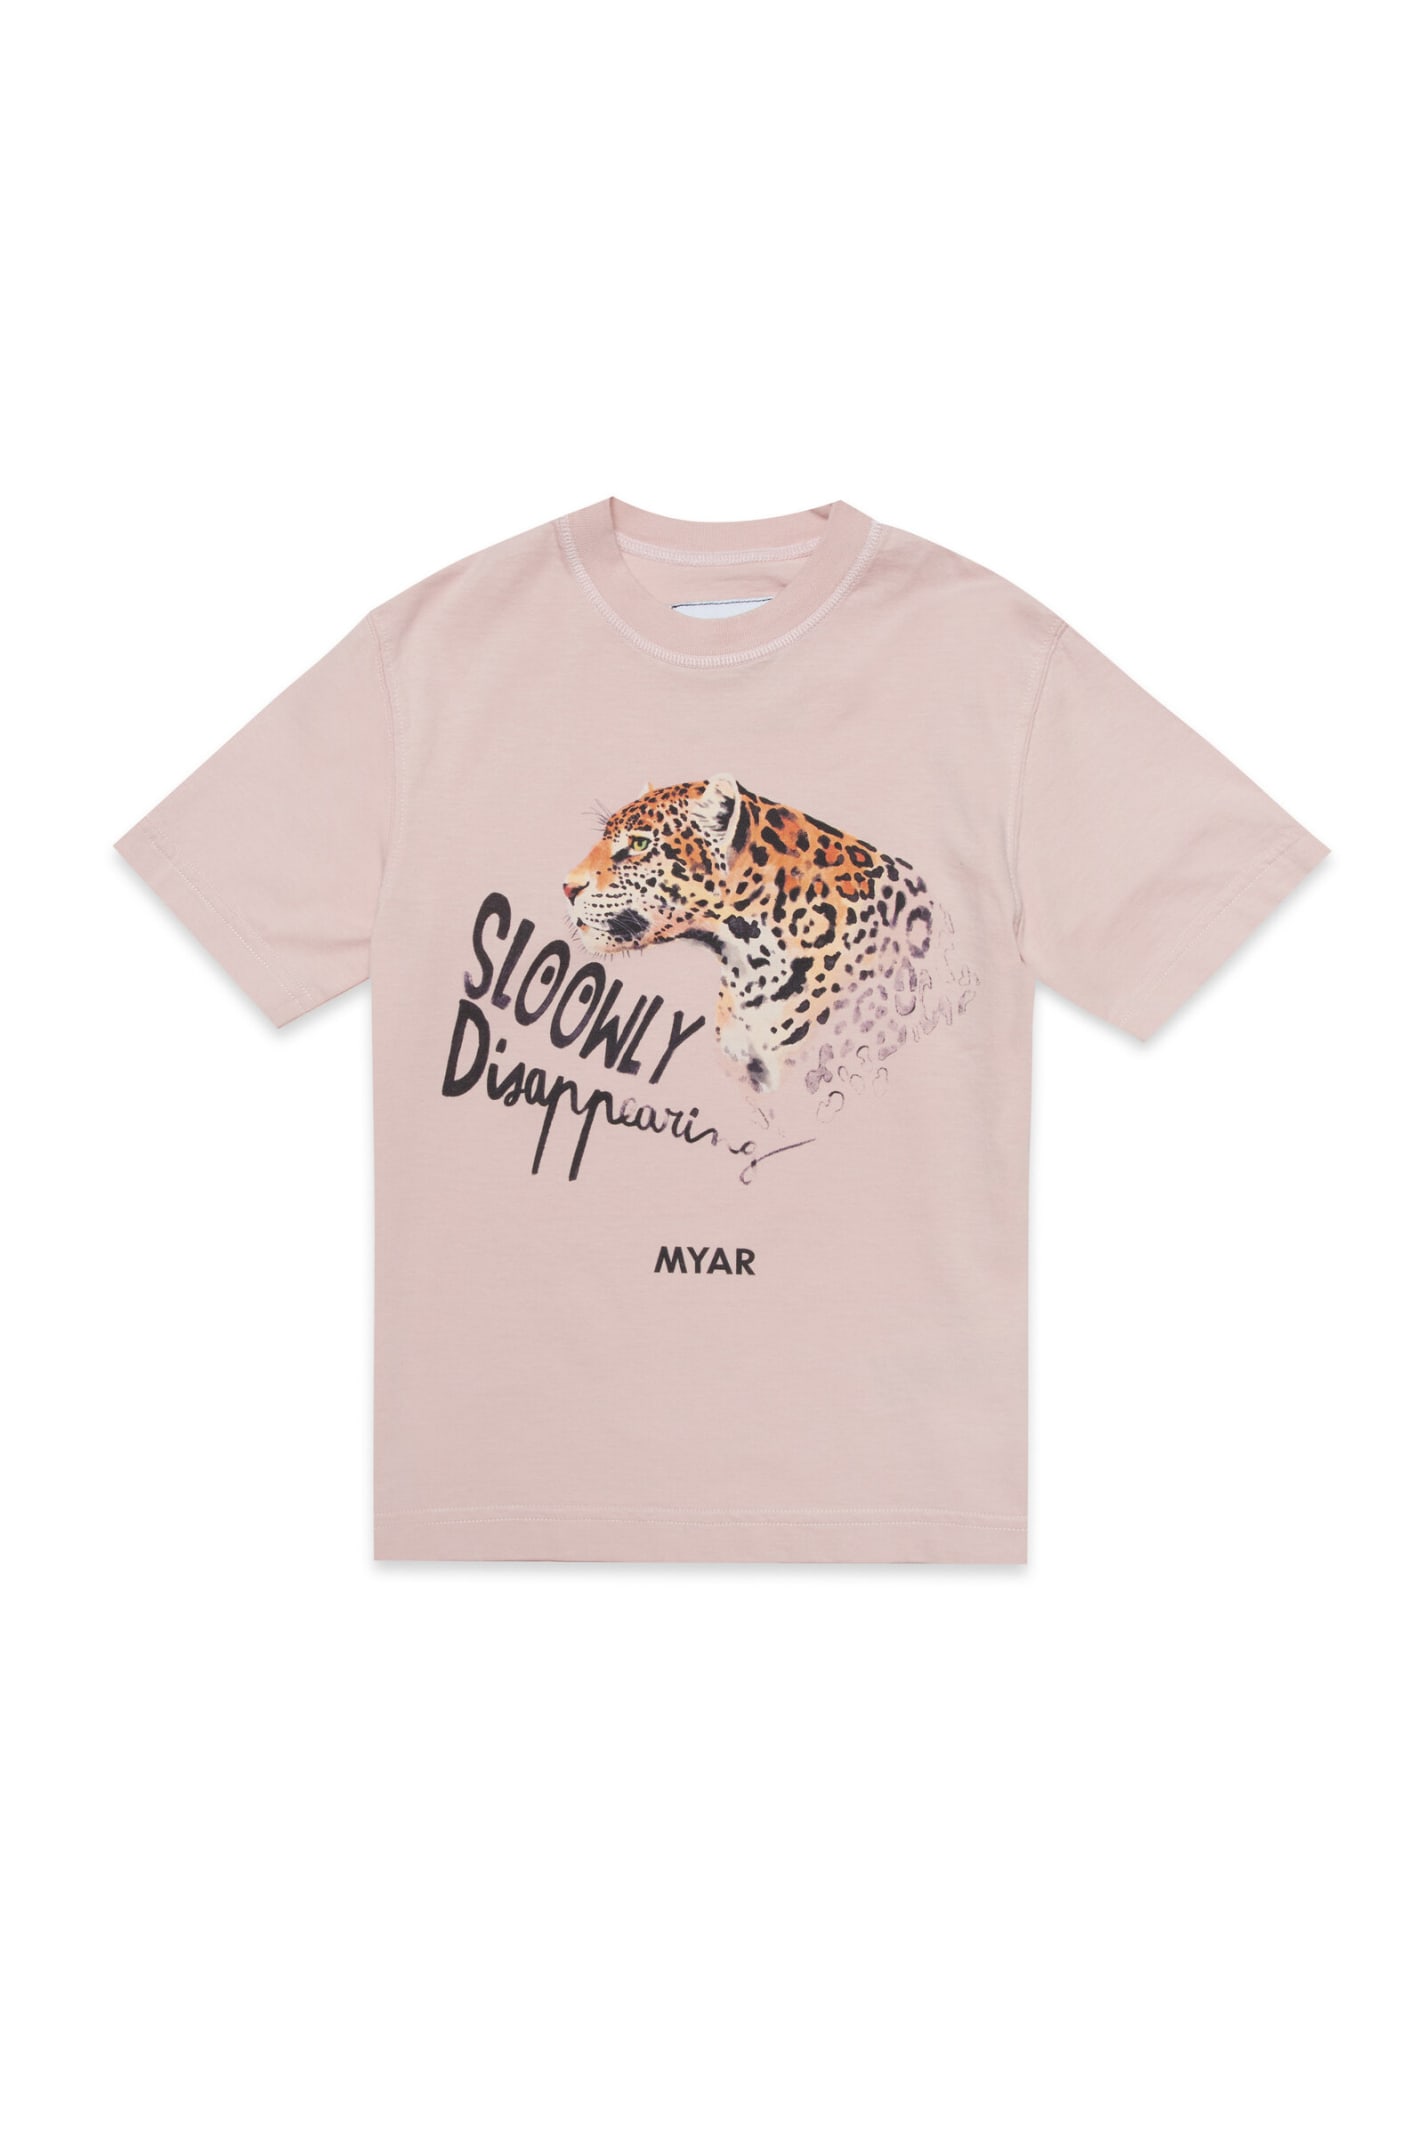 Myar Kids' Deadstock Pink Fabric Crew-neck T-shirt With Digital Print Sloowly